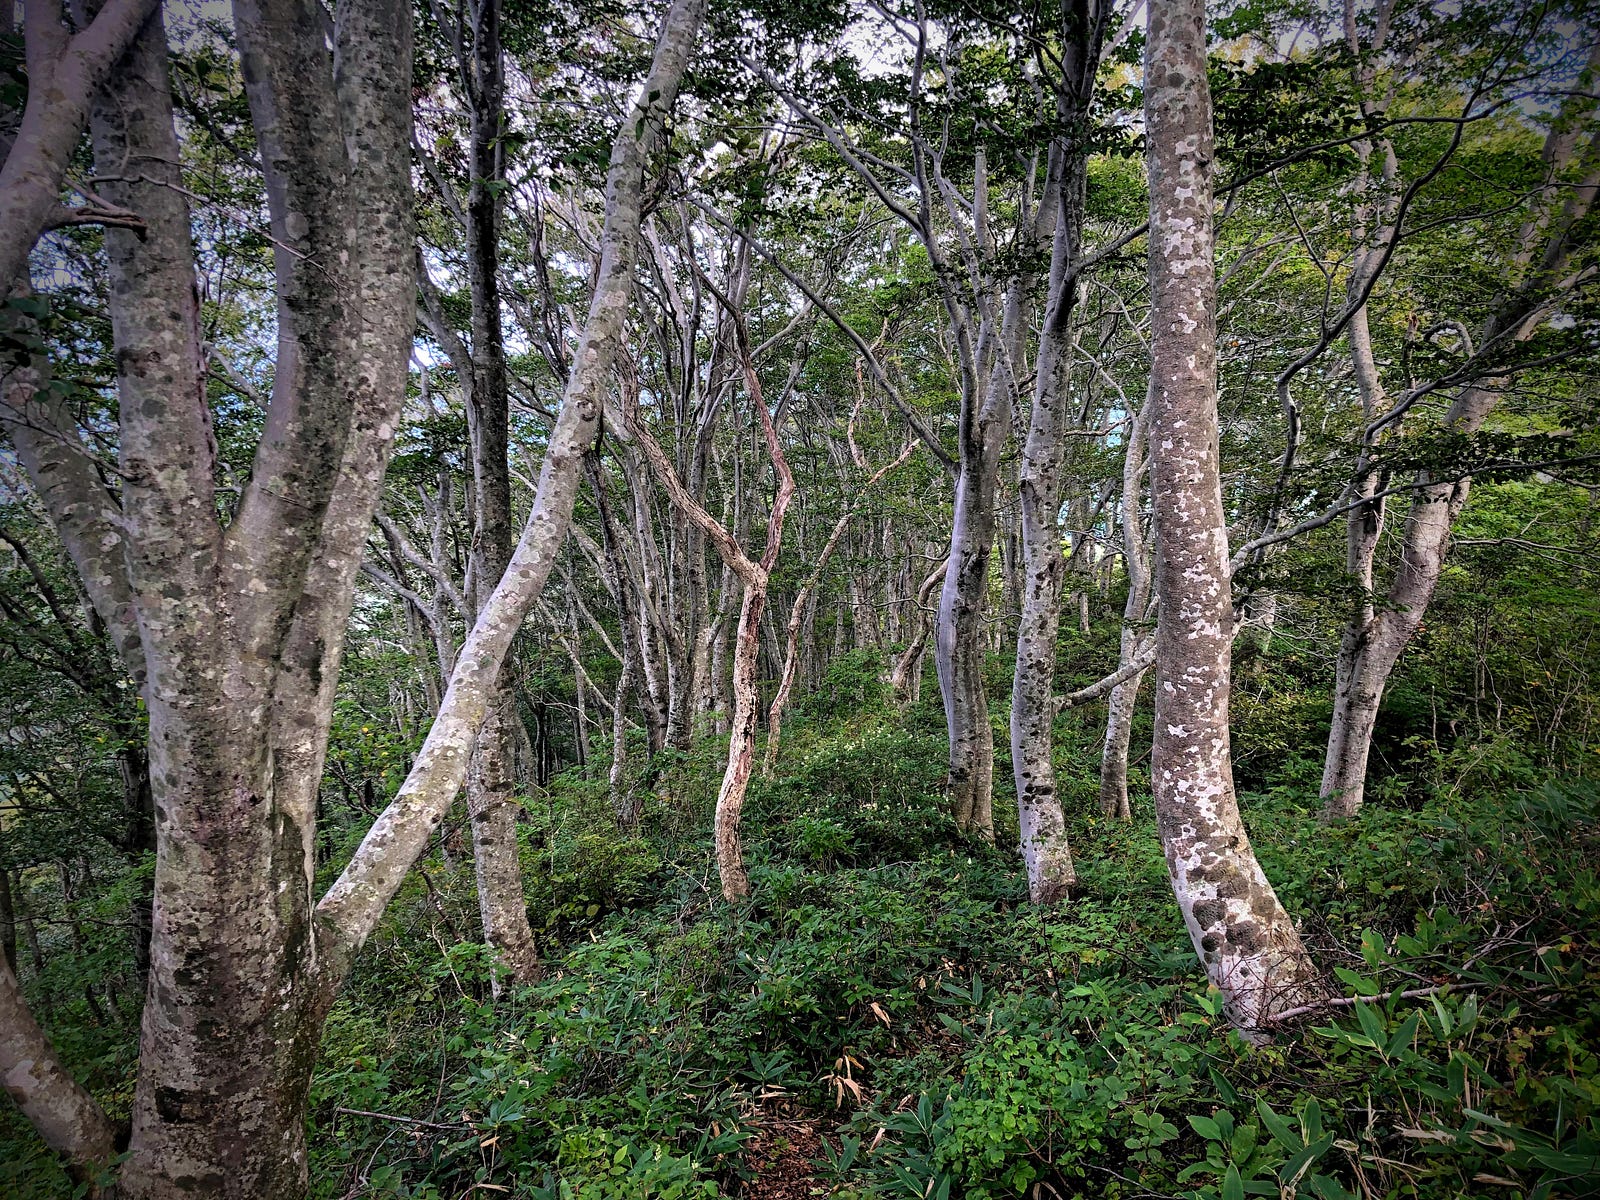 A forest of beech trees with characteristic white trunks covered in black lichen on Mt. Fujikura, one of the 100 Famous Mountains of Yamagata, Japan.